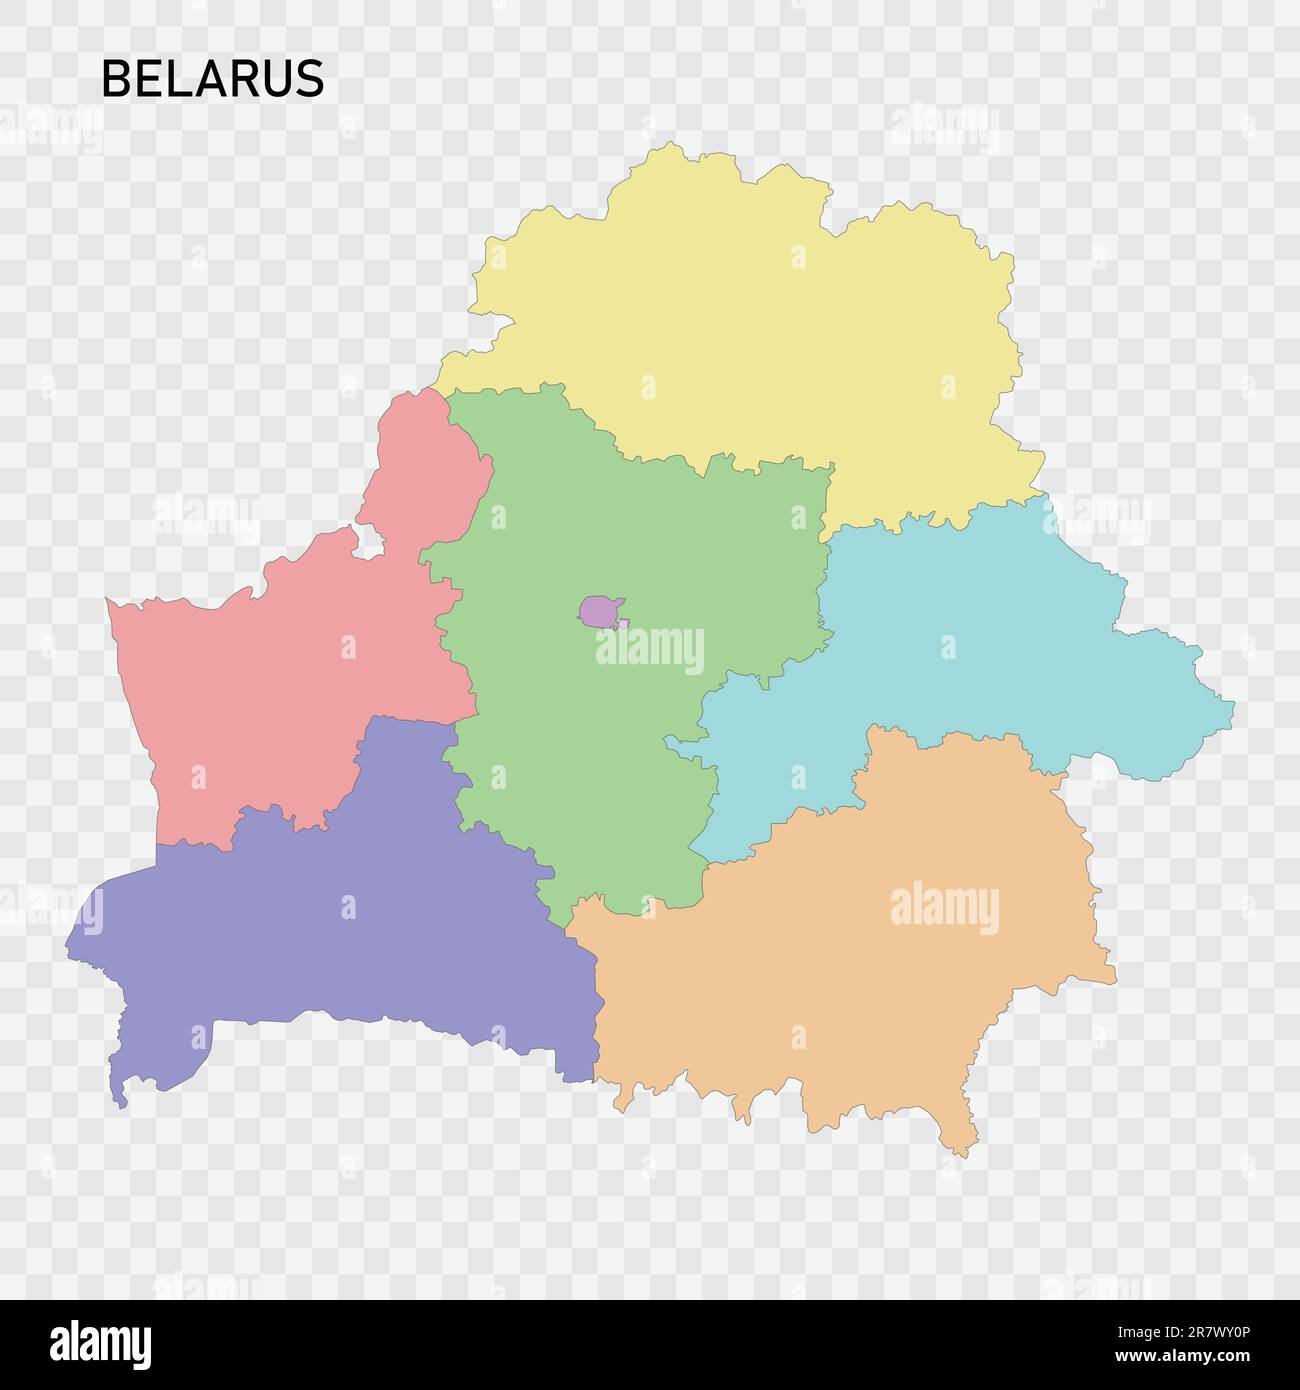 Isolated colored map of Belarus with borders of the regions Stock Vector